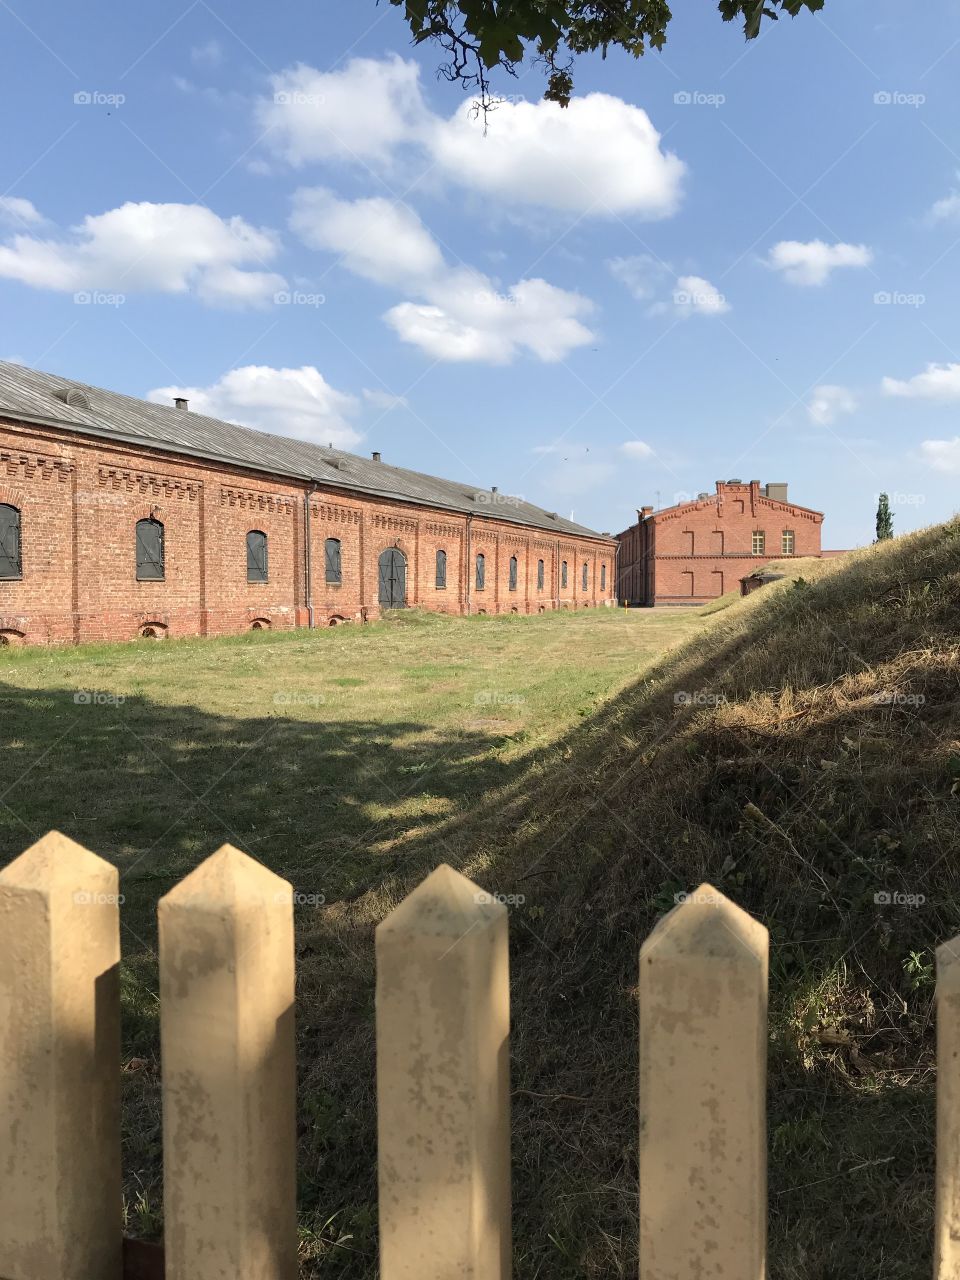 Hamina's Bastions .The fortress in Hamina was built by Swedish general Axel von Leven in the 1720s. Hamina fortress lost its military importance in 1809 year. At the end of the century, it lost some of its fortifications.Hamina,Suomi,Finland 🇫🇮